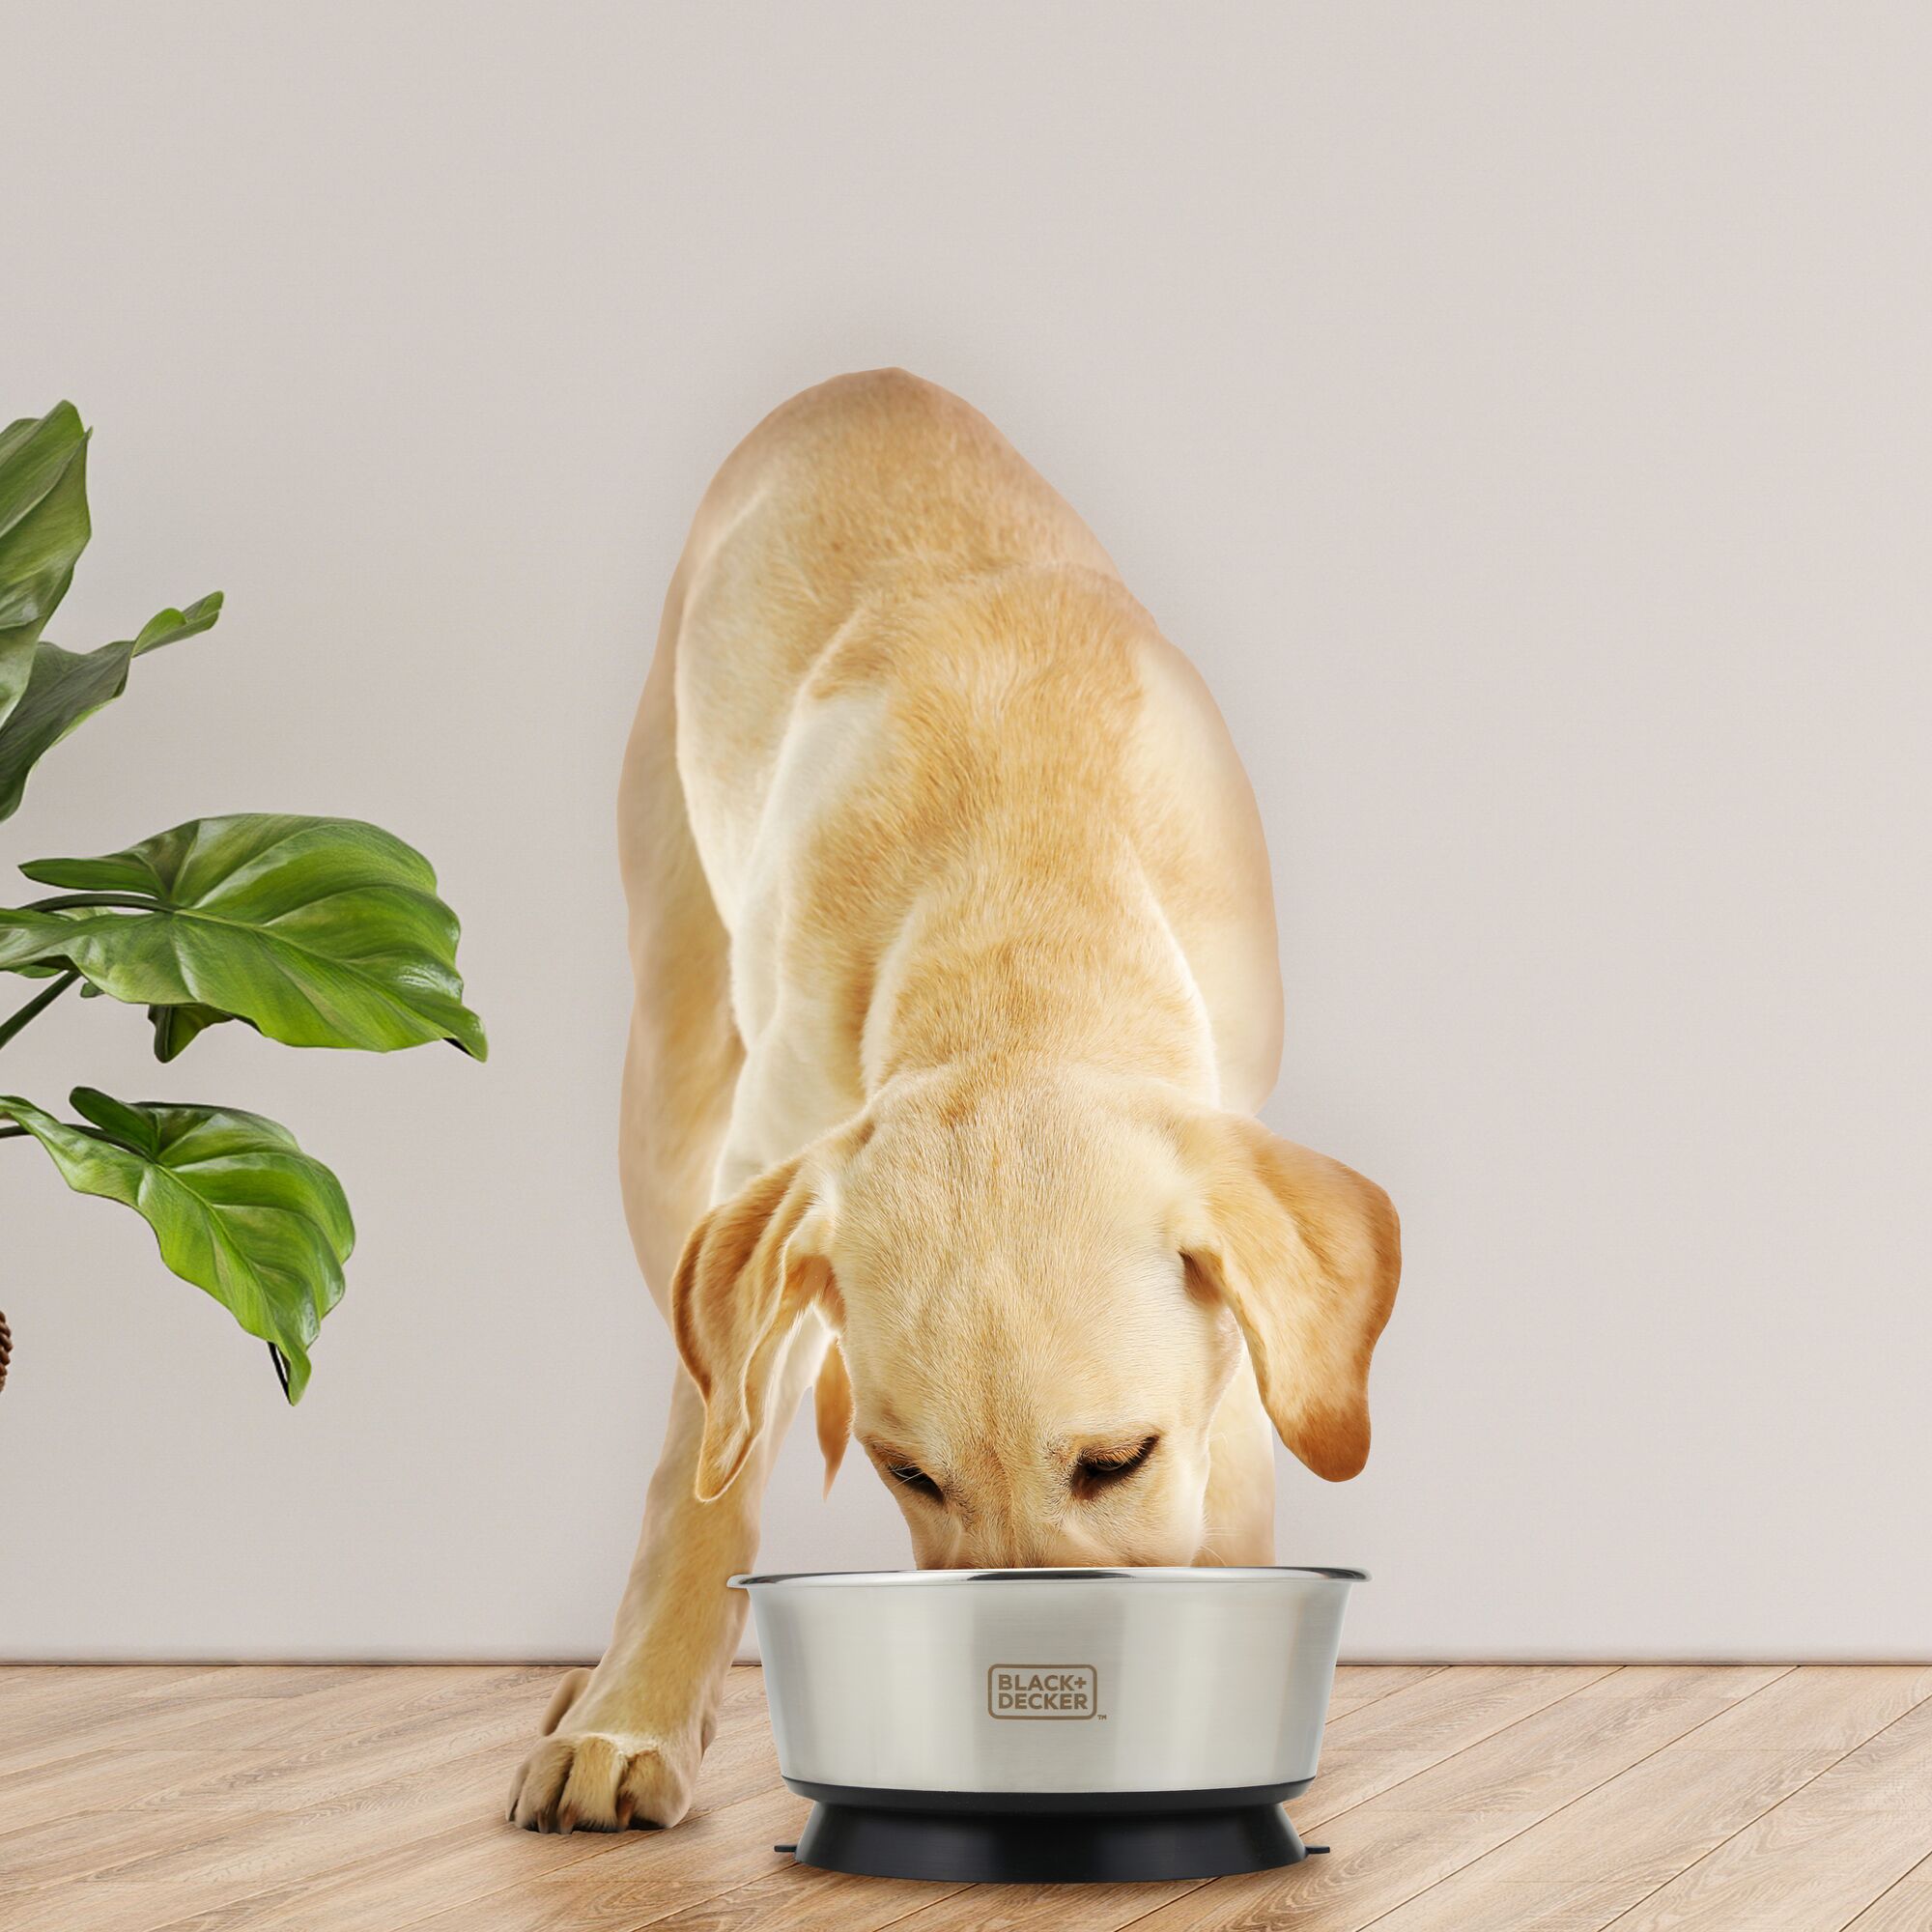 Labrador Retriever eating from silver Black and Decker suction cup dog bowl next to floor plant